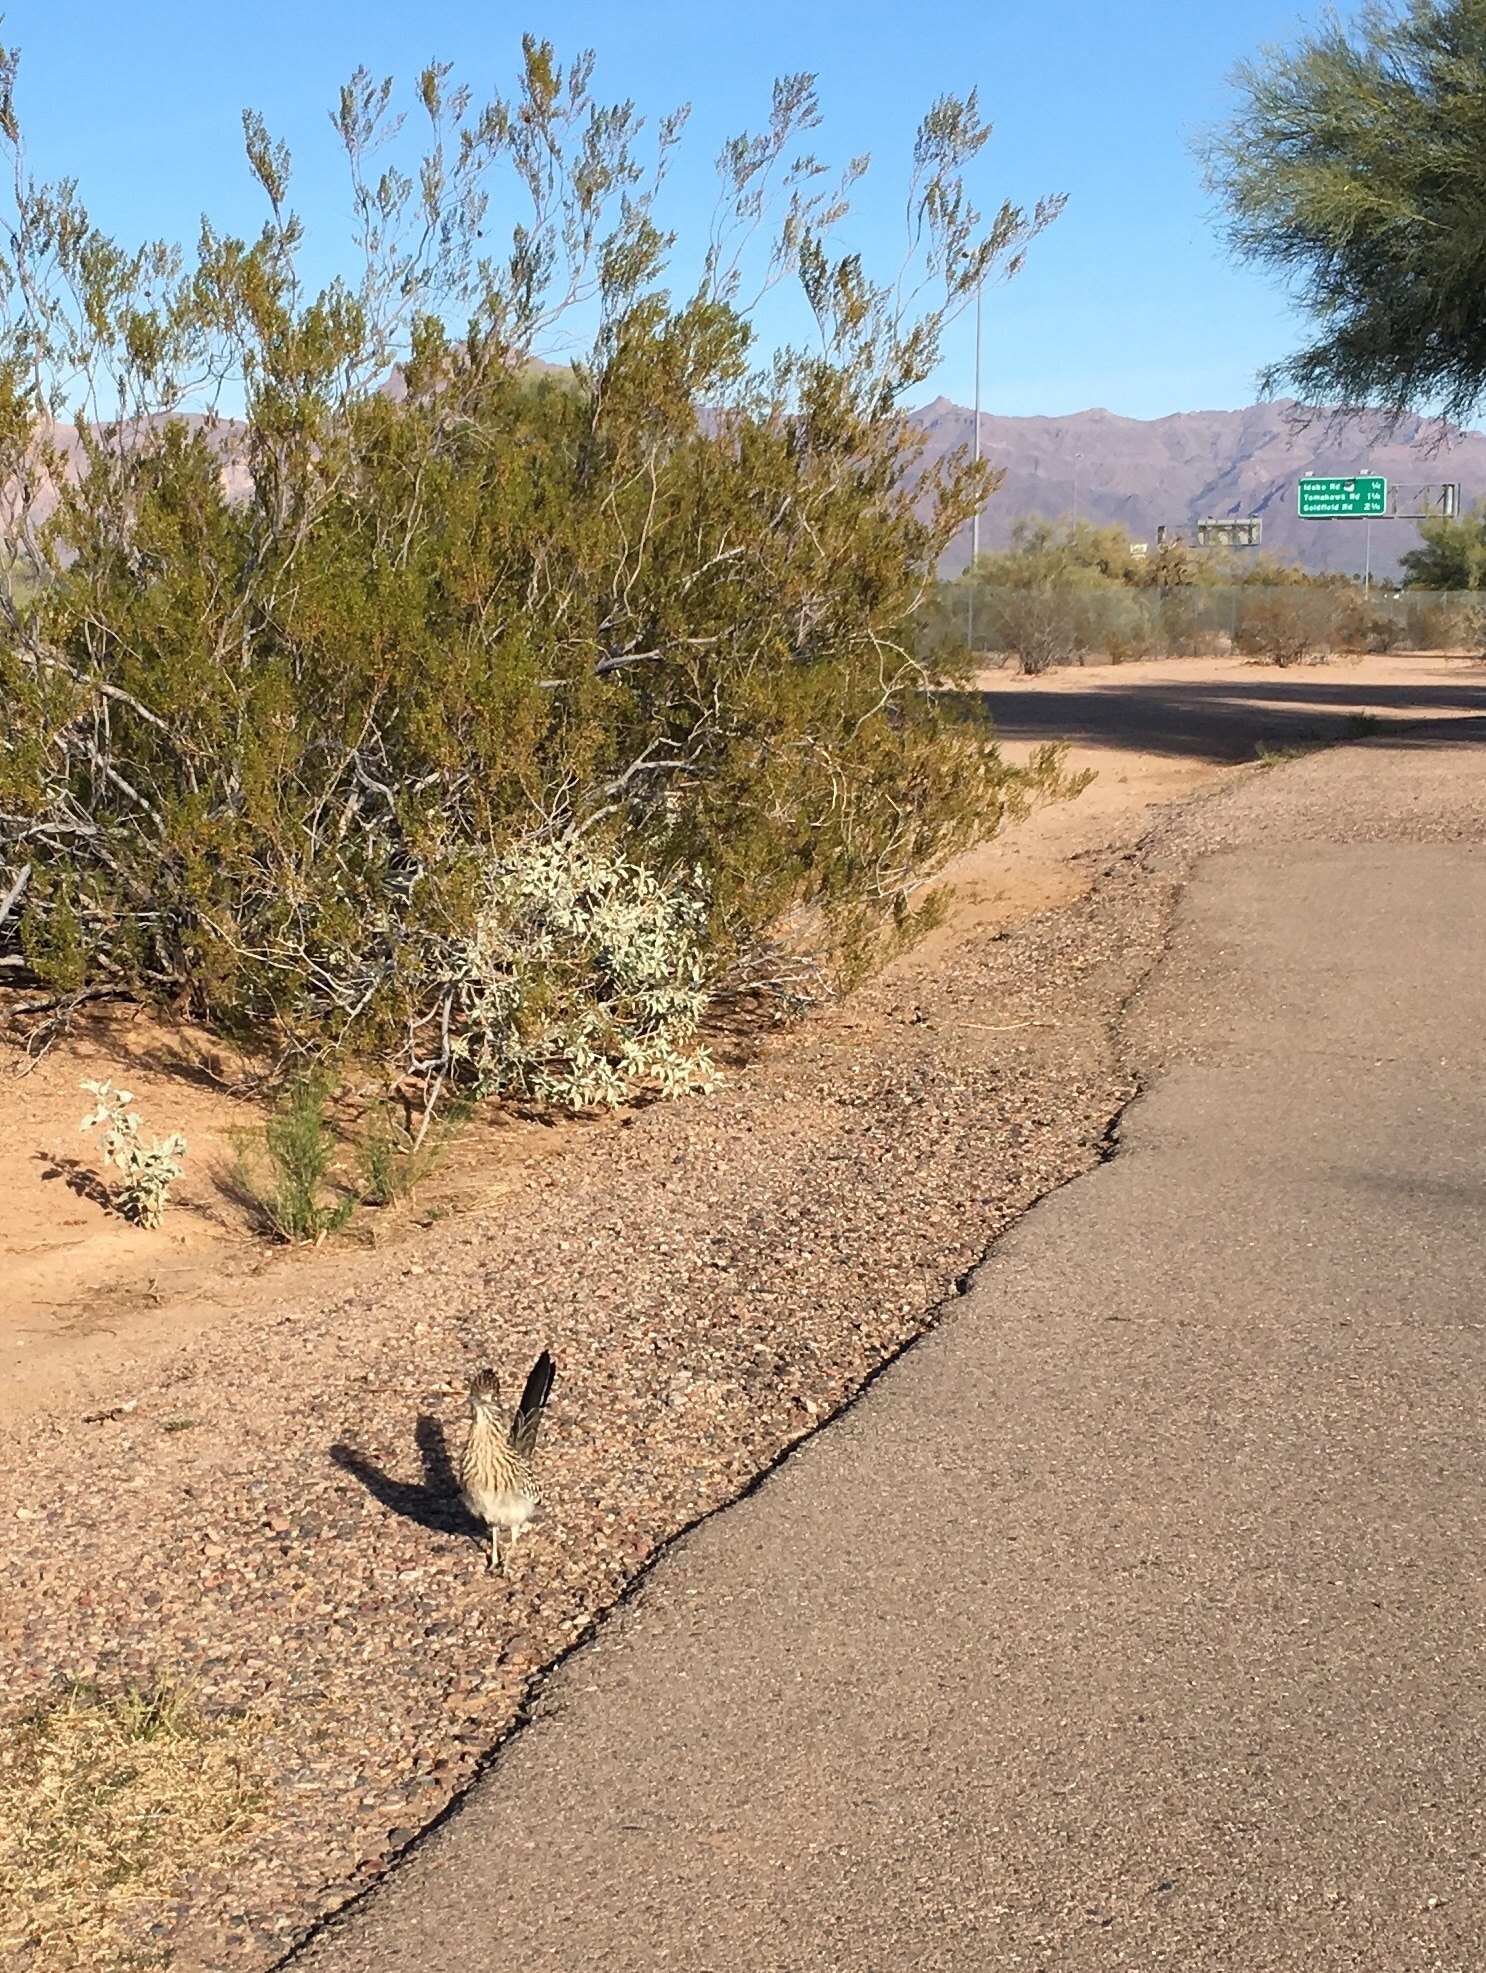 Beep beep! This road runner wanted to play golf with us. #roadrunner#Arizona